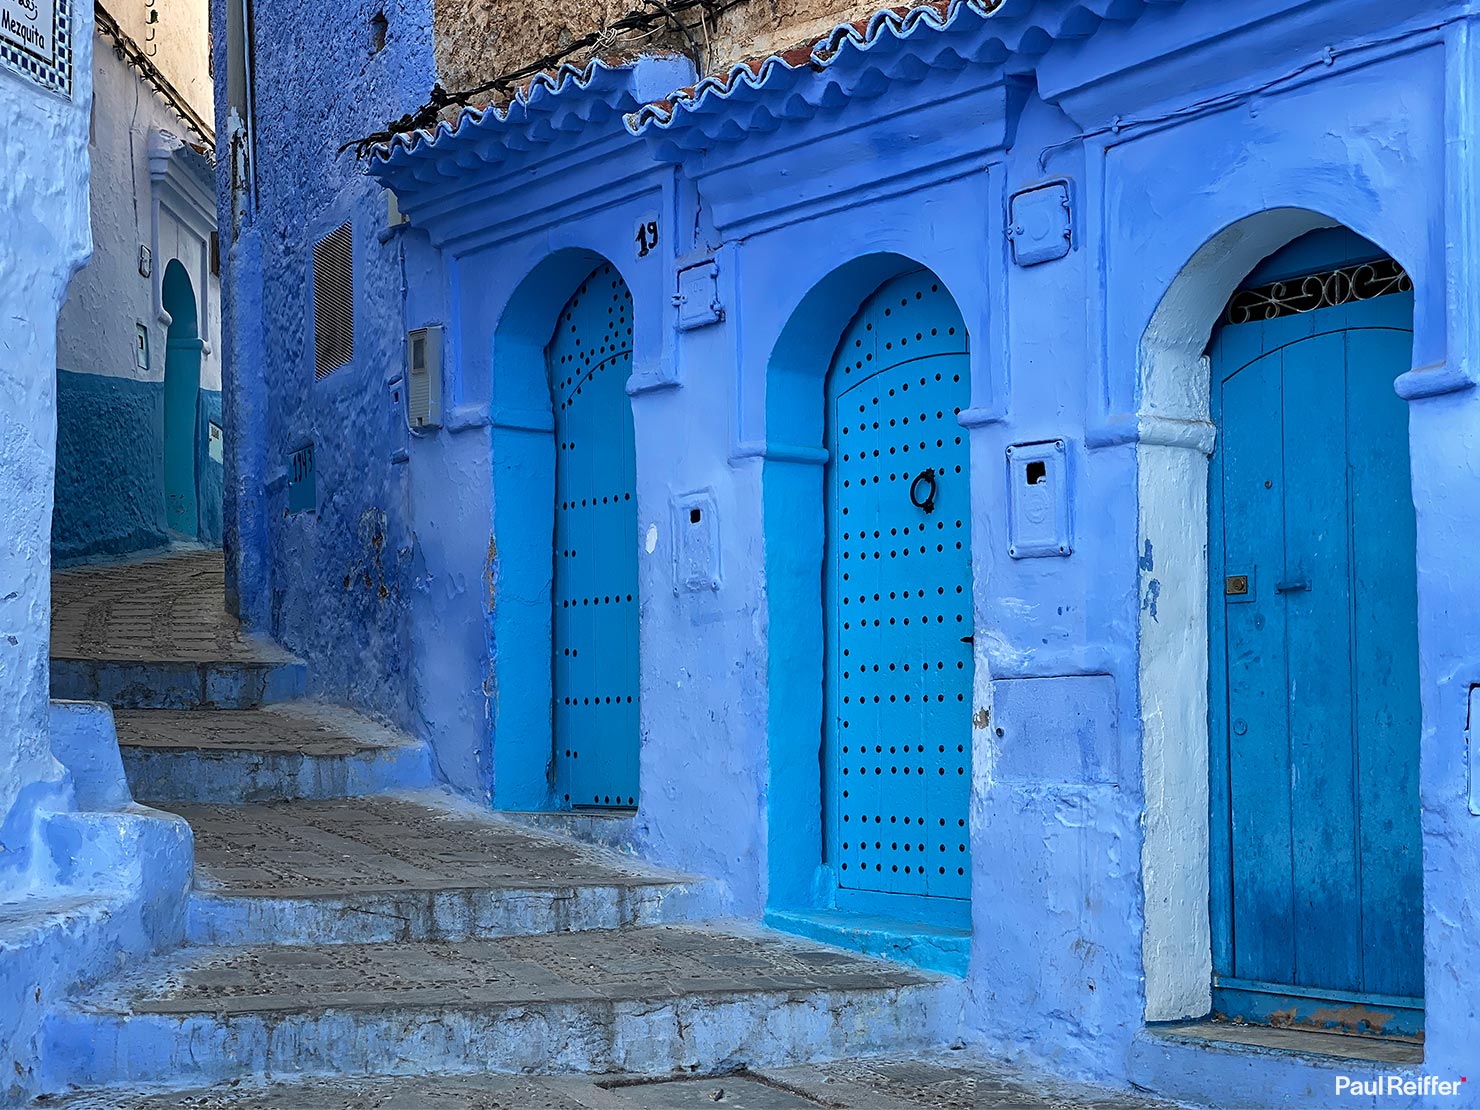 Blue Walls Doors Three Steps Painted City Visit Chefchaouen Morocco Chaouen Empty Street Scenes Paul Reiffer Photographer iPhone Travel Apple Landscape Photography